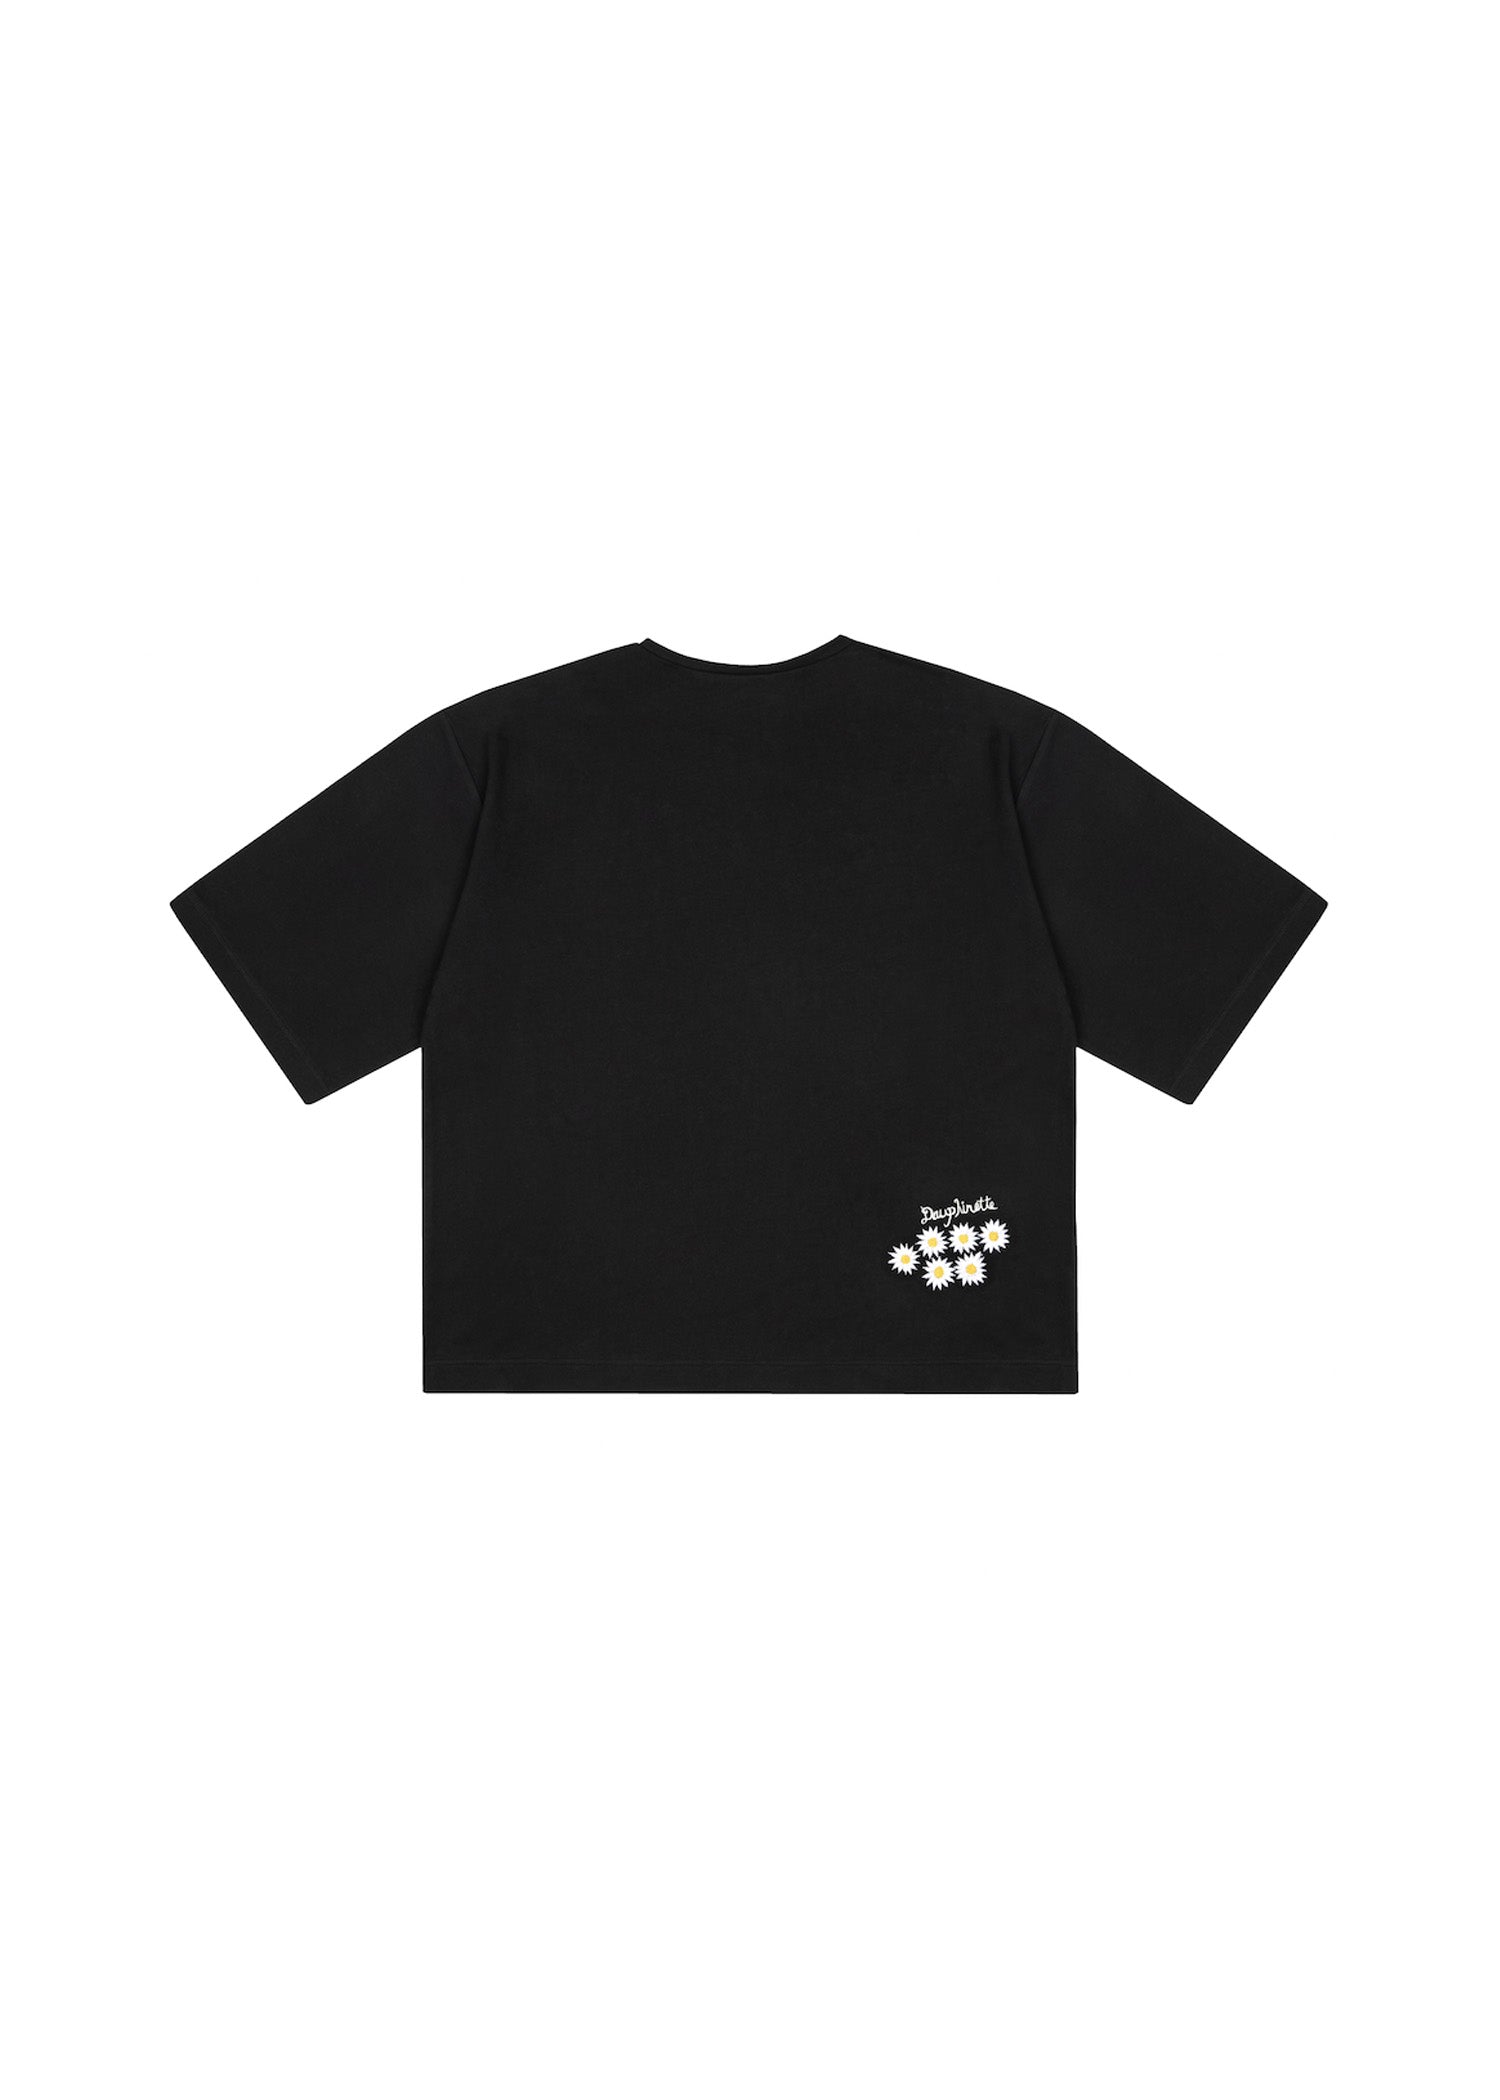 Black Oversized heavyweight boxy tee embroidered with our signature cherubs and daisies. Based on an illustration by designer Olivia Cheng.